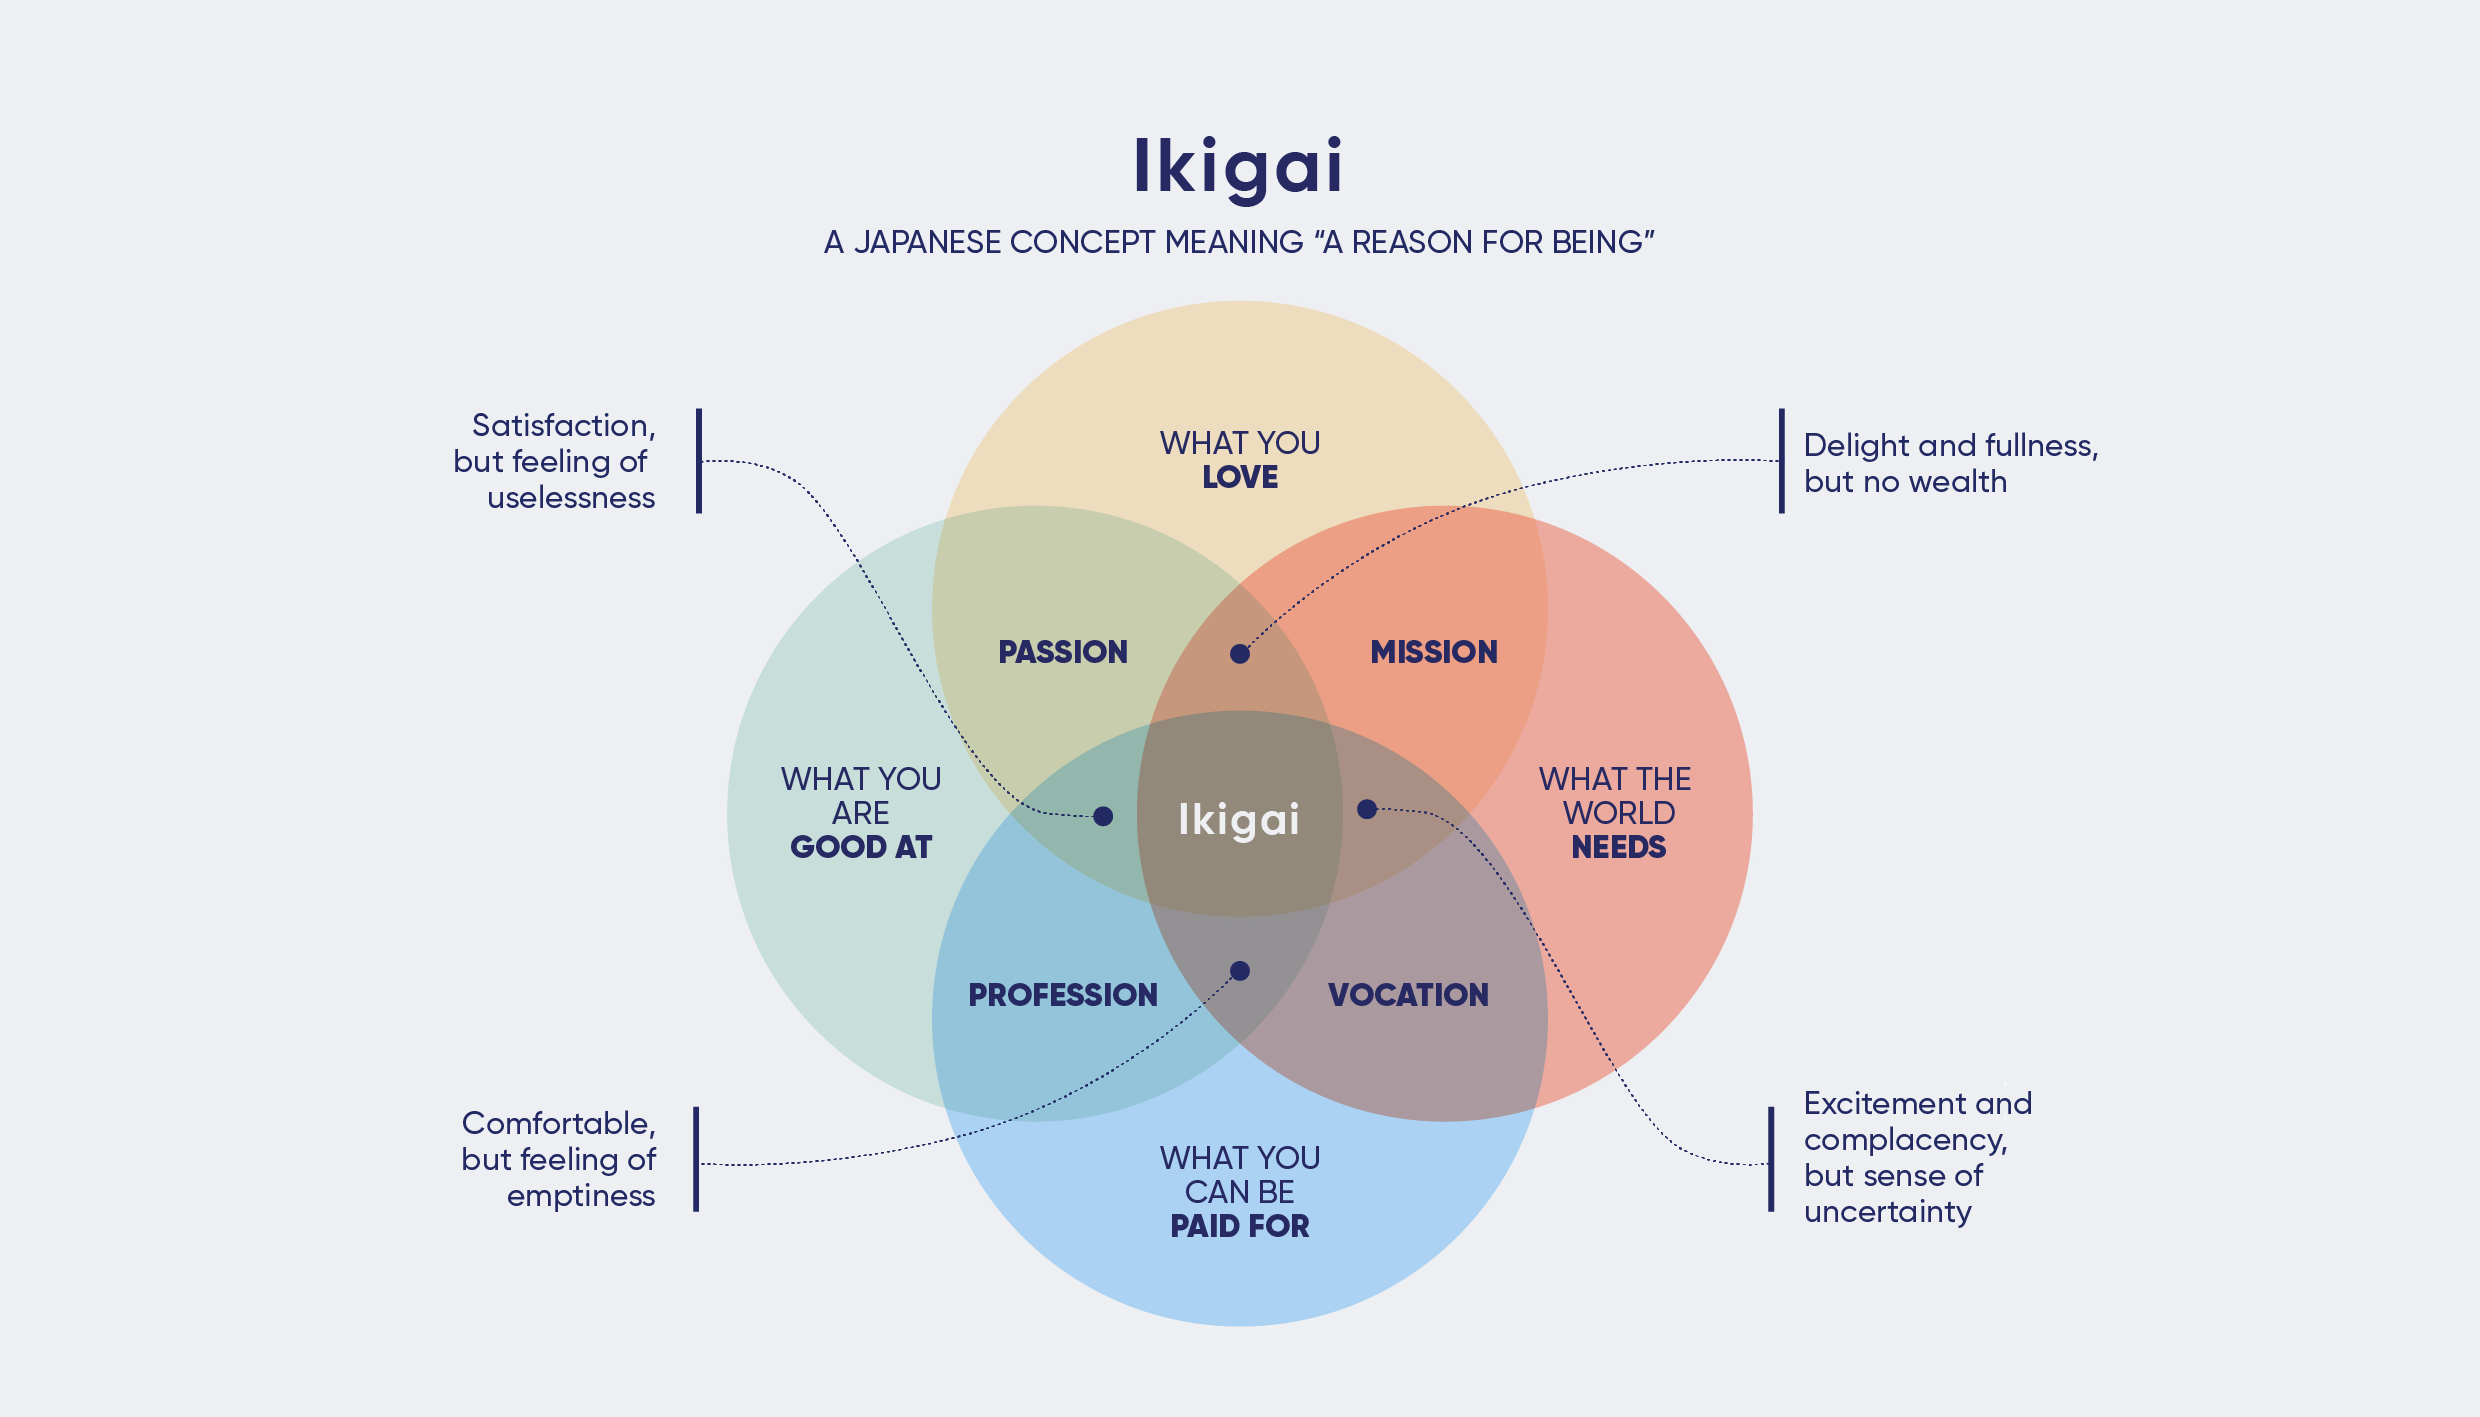 Your reason for being: Ikigai